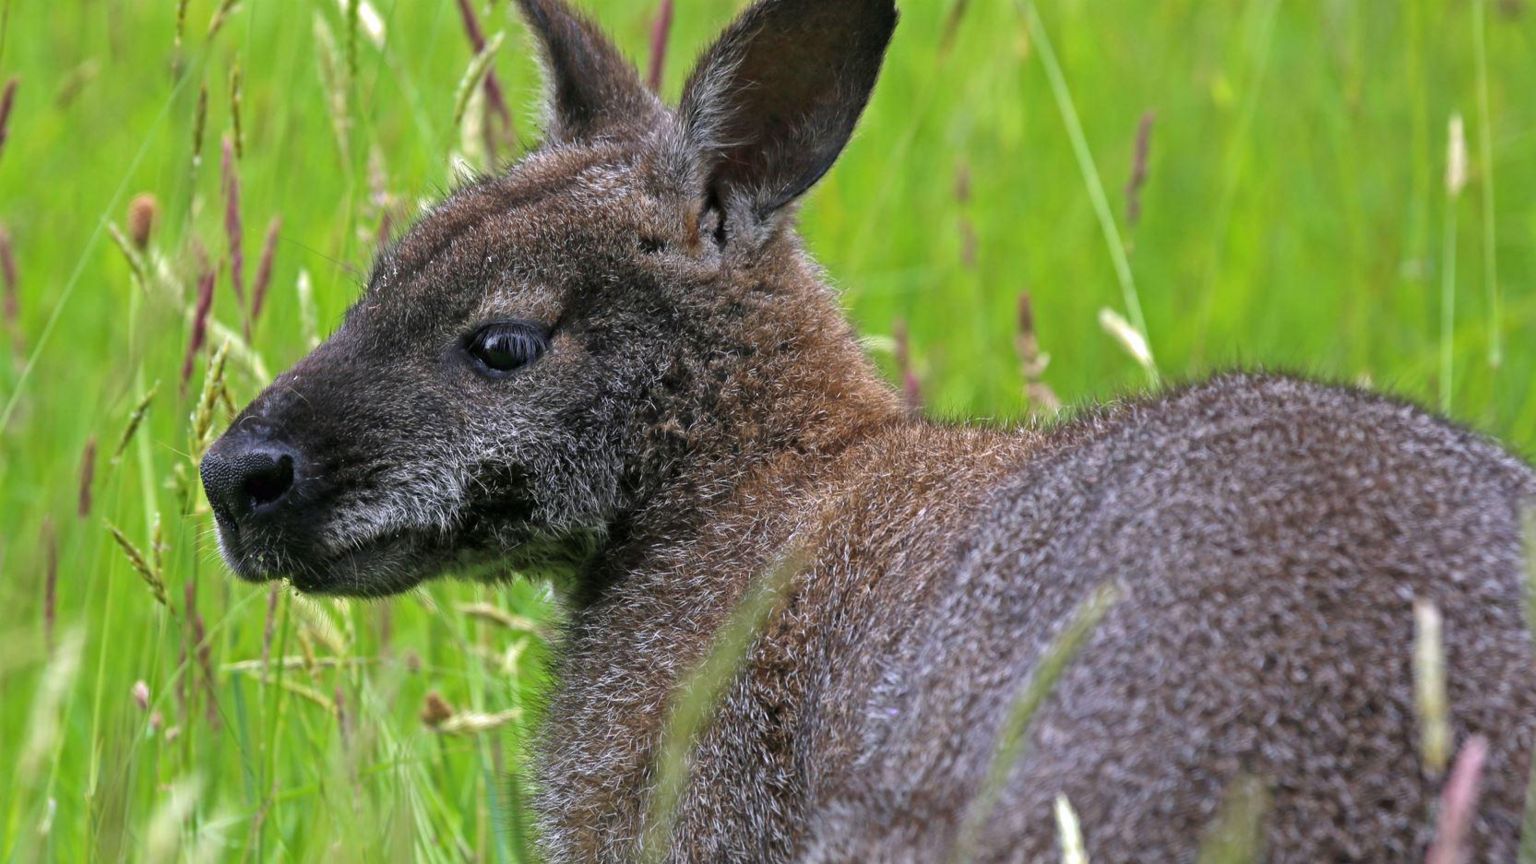 Survey finds more than 560 wallabies living in wild on Isle of Man